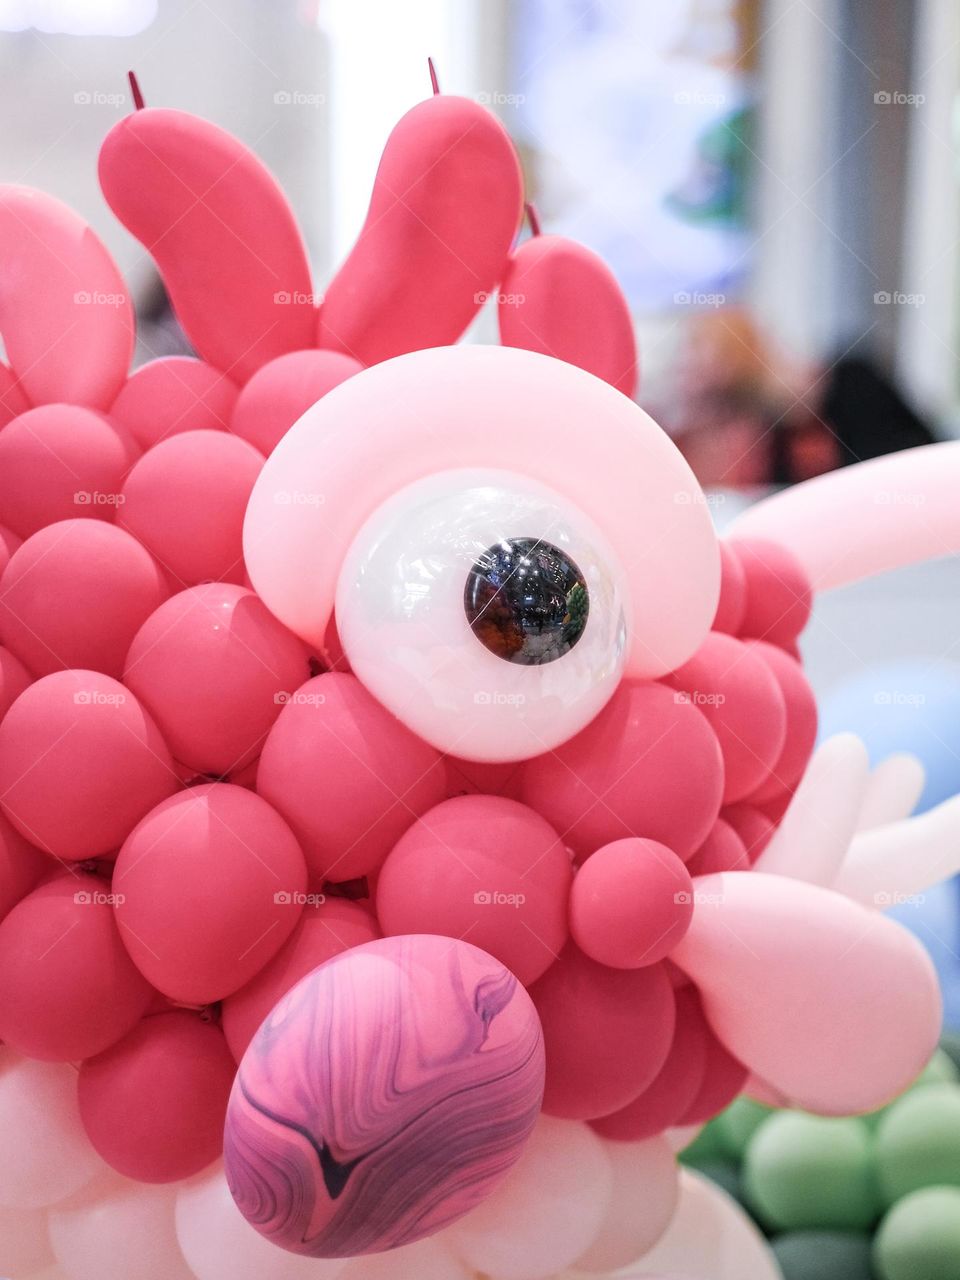 Close-up of pink balloons made into a fish